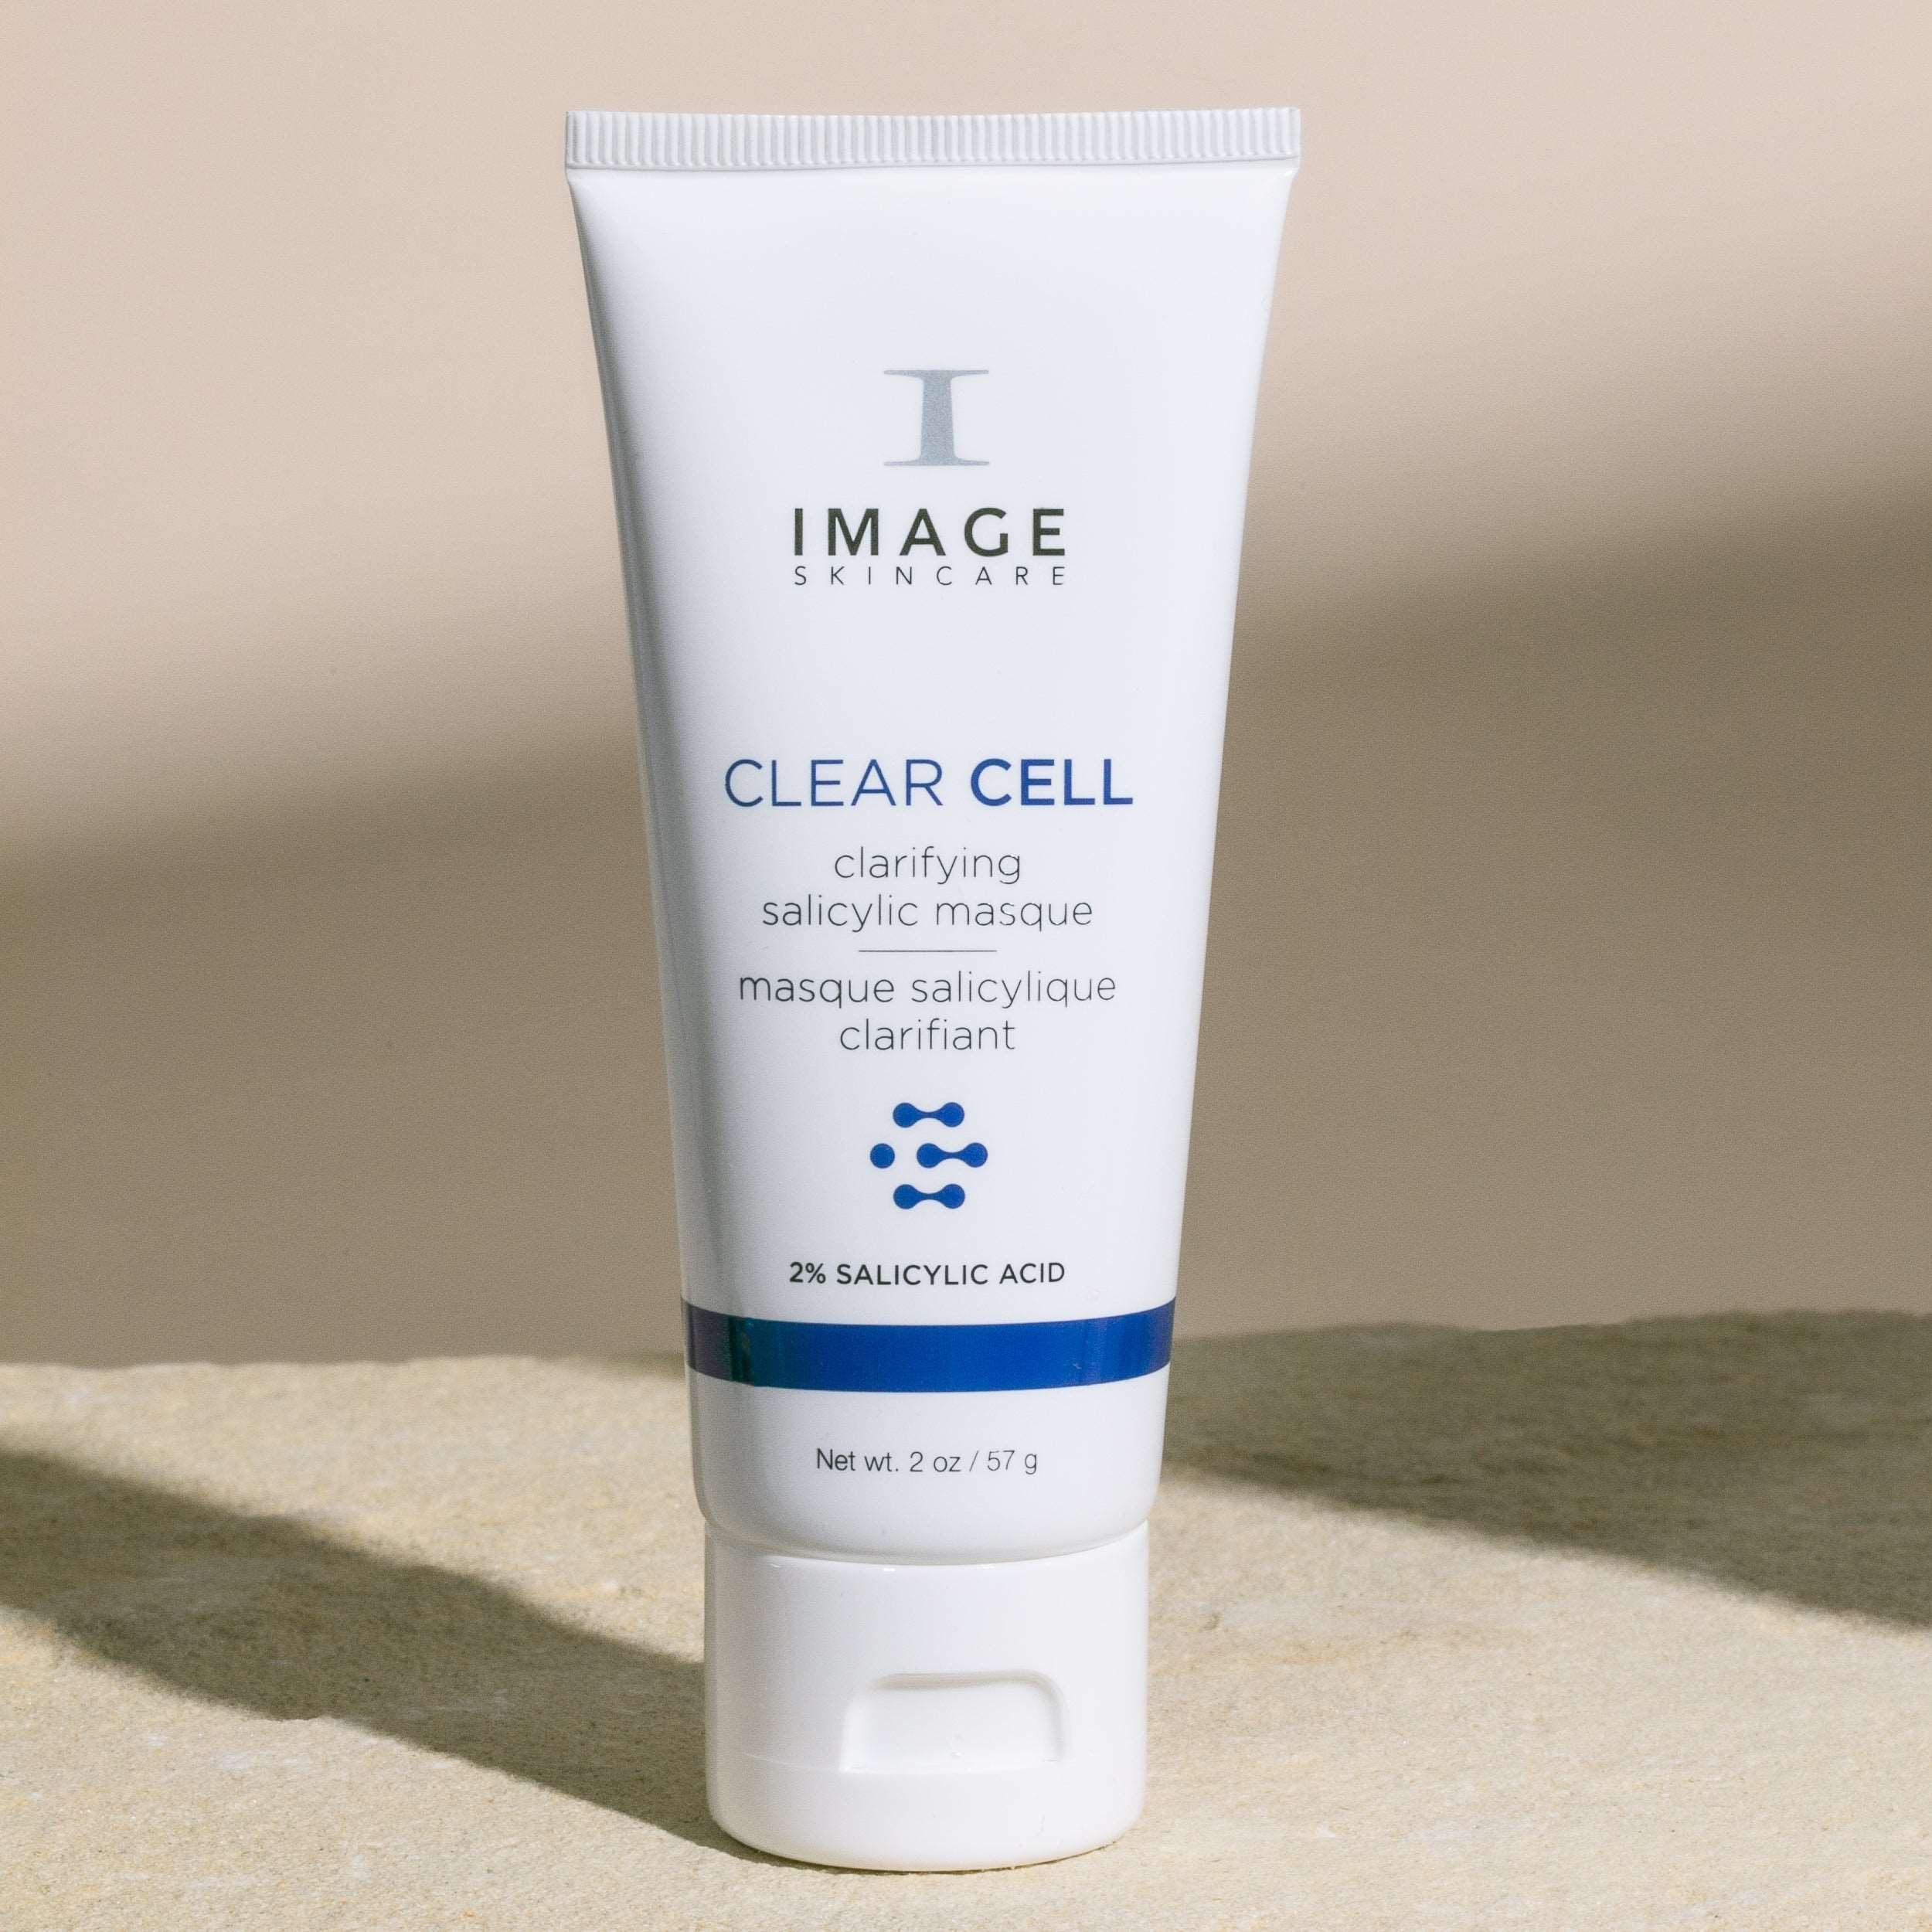 CLEAR CELL Clarifying Salicylic Masque Image Skincare